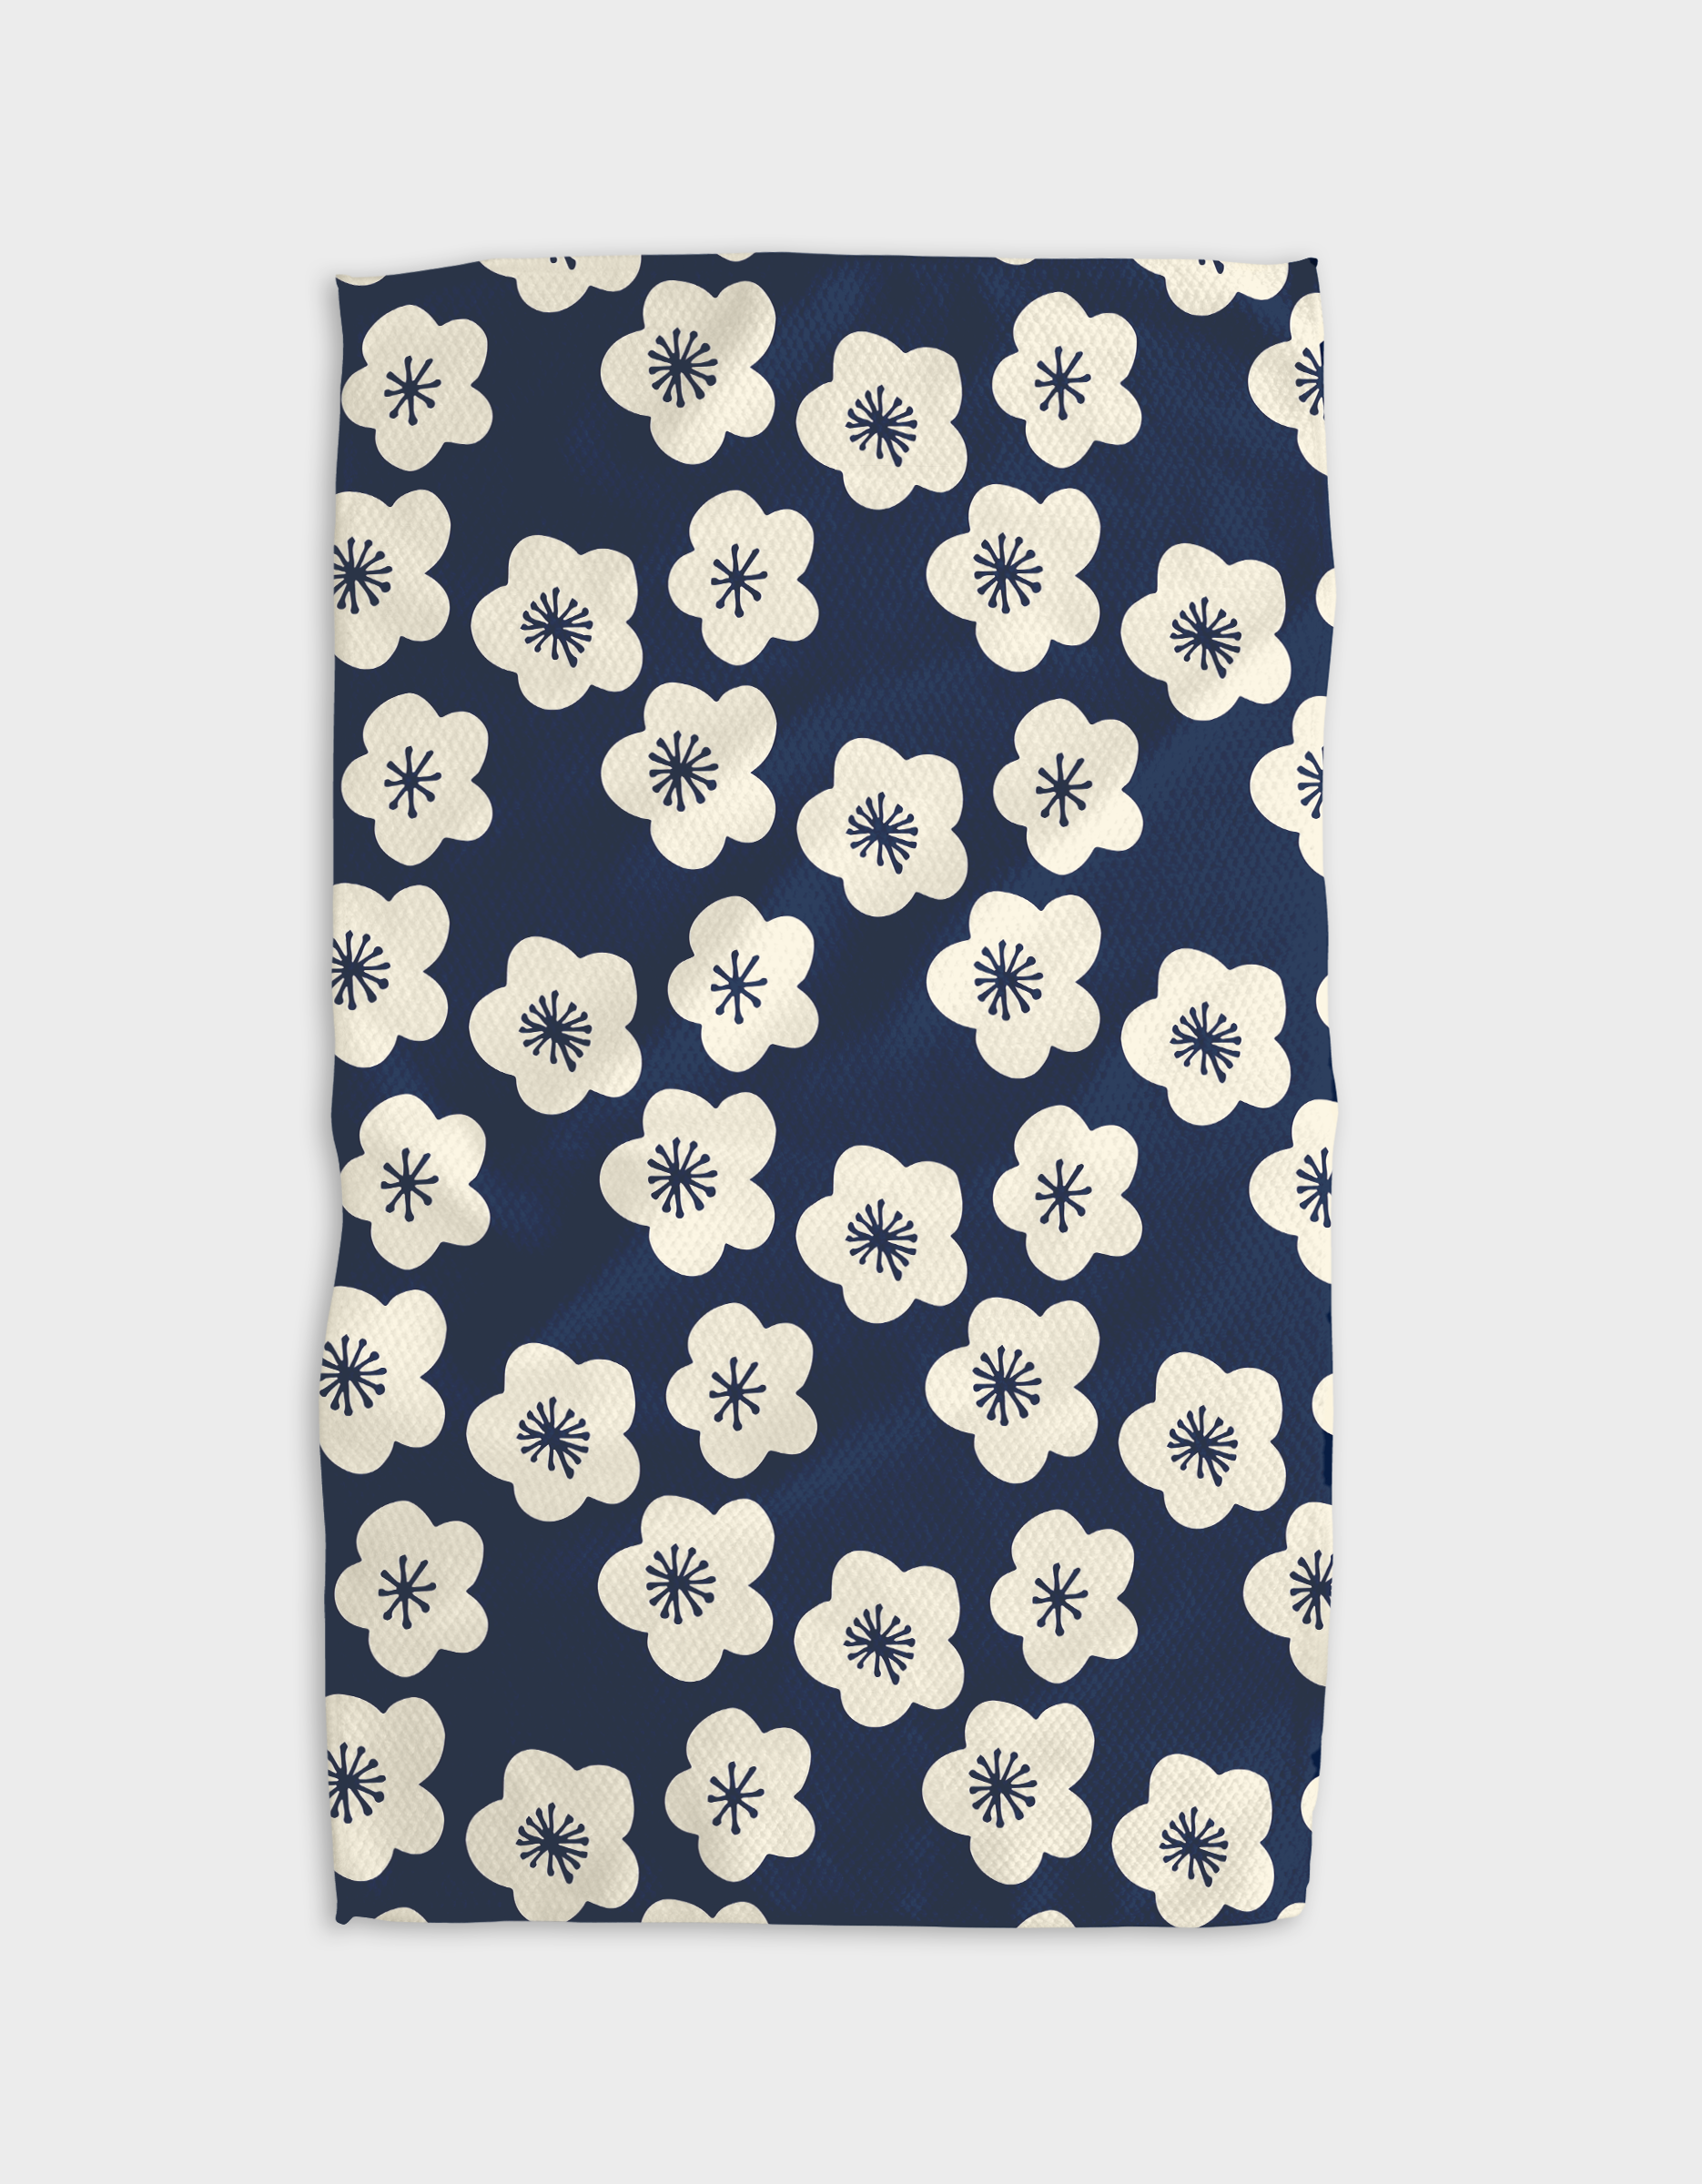 Every Sunday Kitchen Tea Towel by Geometry. Tea Towel has white flowers on a navy blue background.